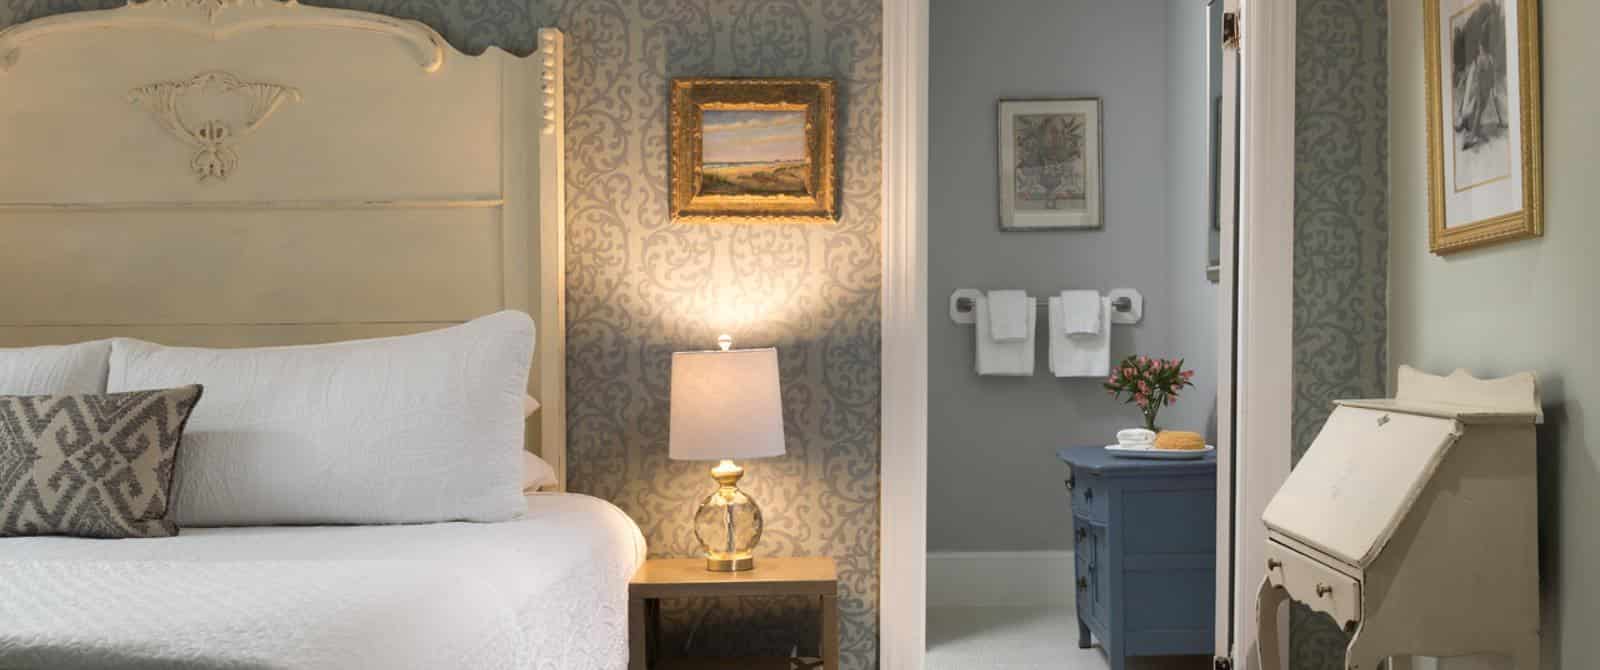 Bedroom with large light-colored ornate headboard, white bedding, and view into attached bathroom with blueish-gray cabinet